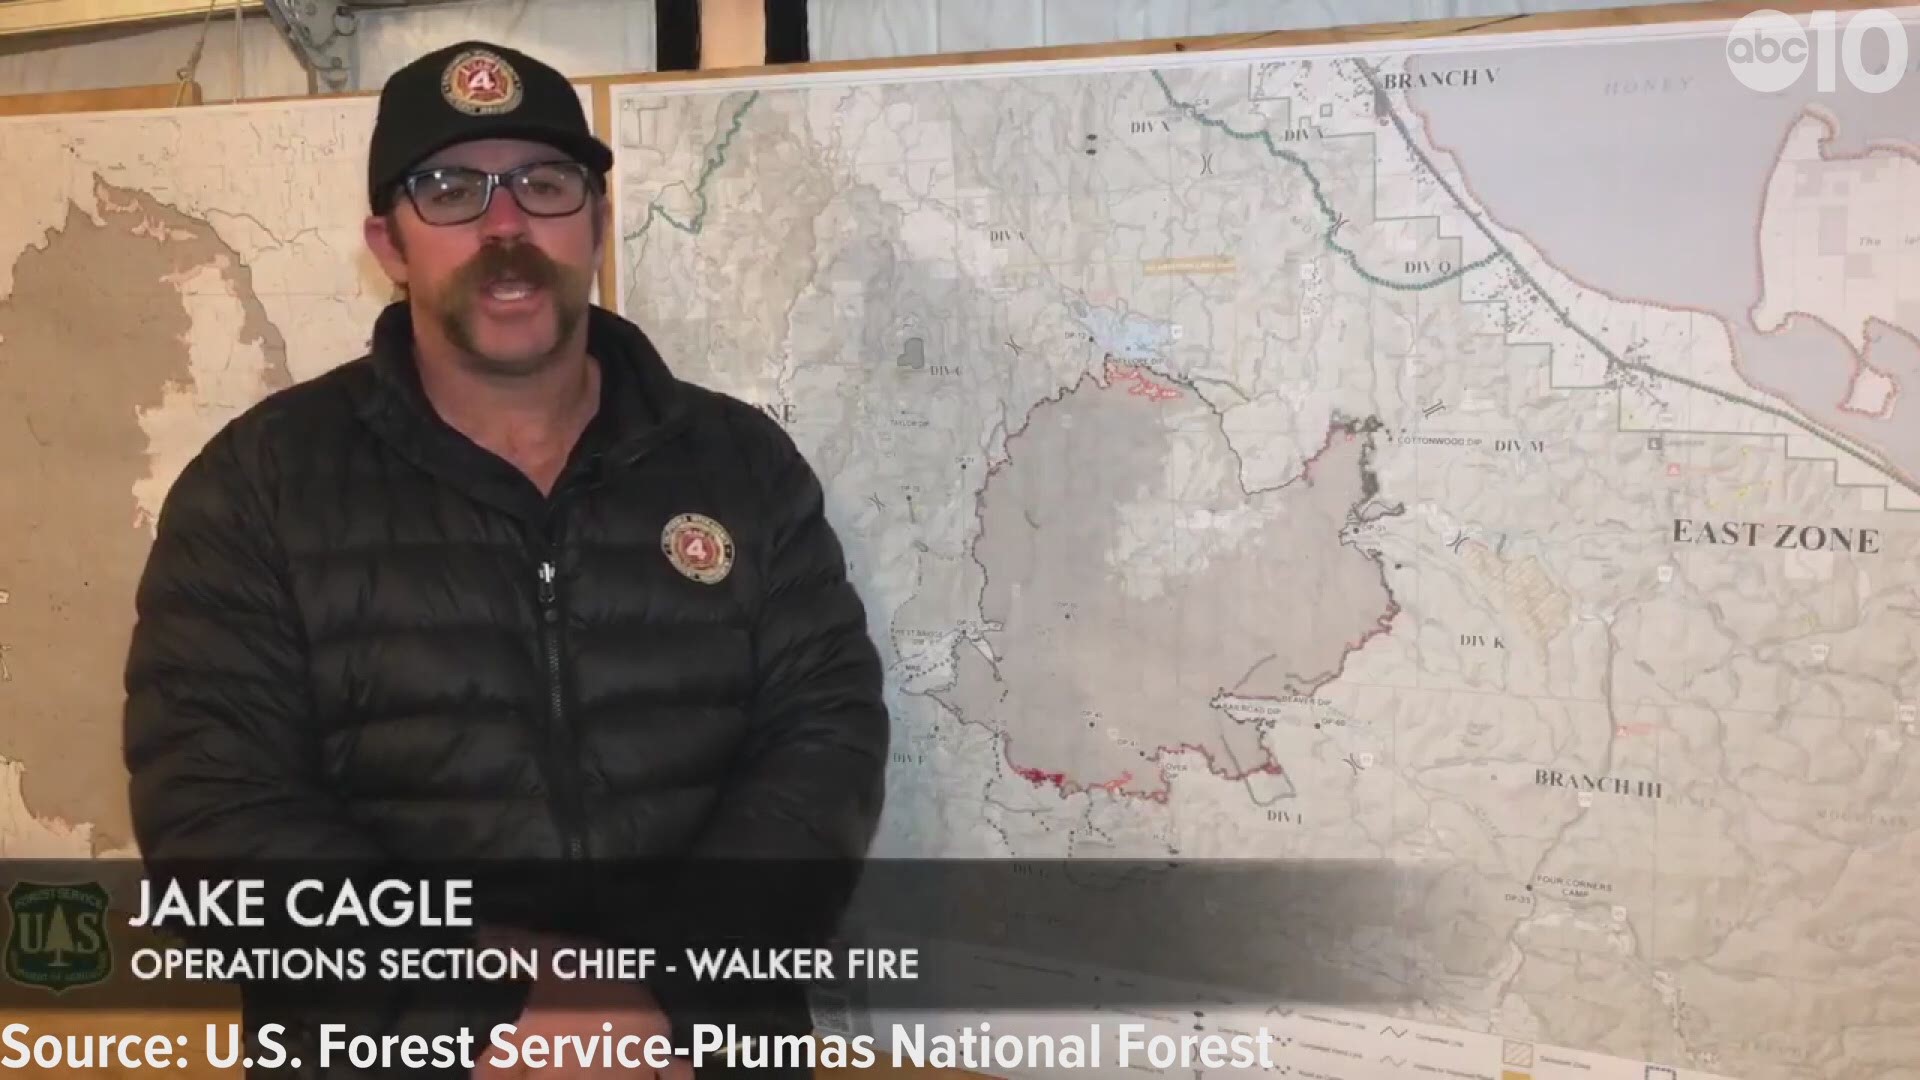 A Red Flag Warning is in effect because of forecasted 40 mph winds over the weekend. The Walker Fire is California's largest wildfire of 2019.